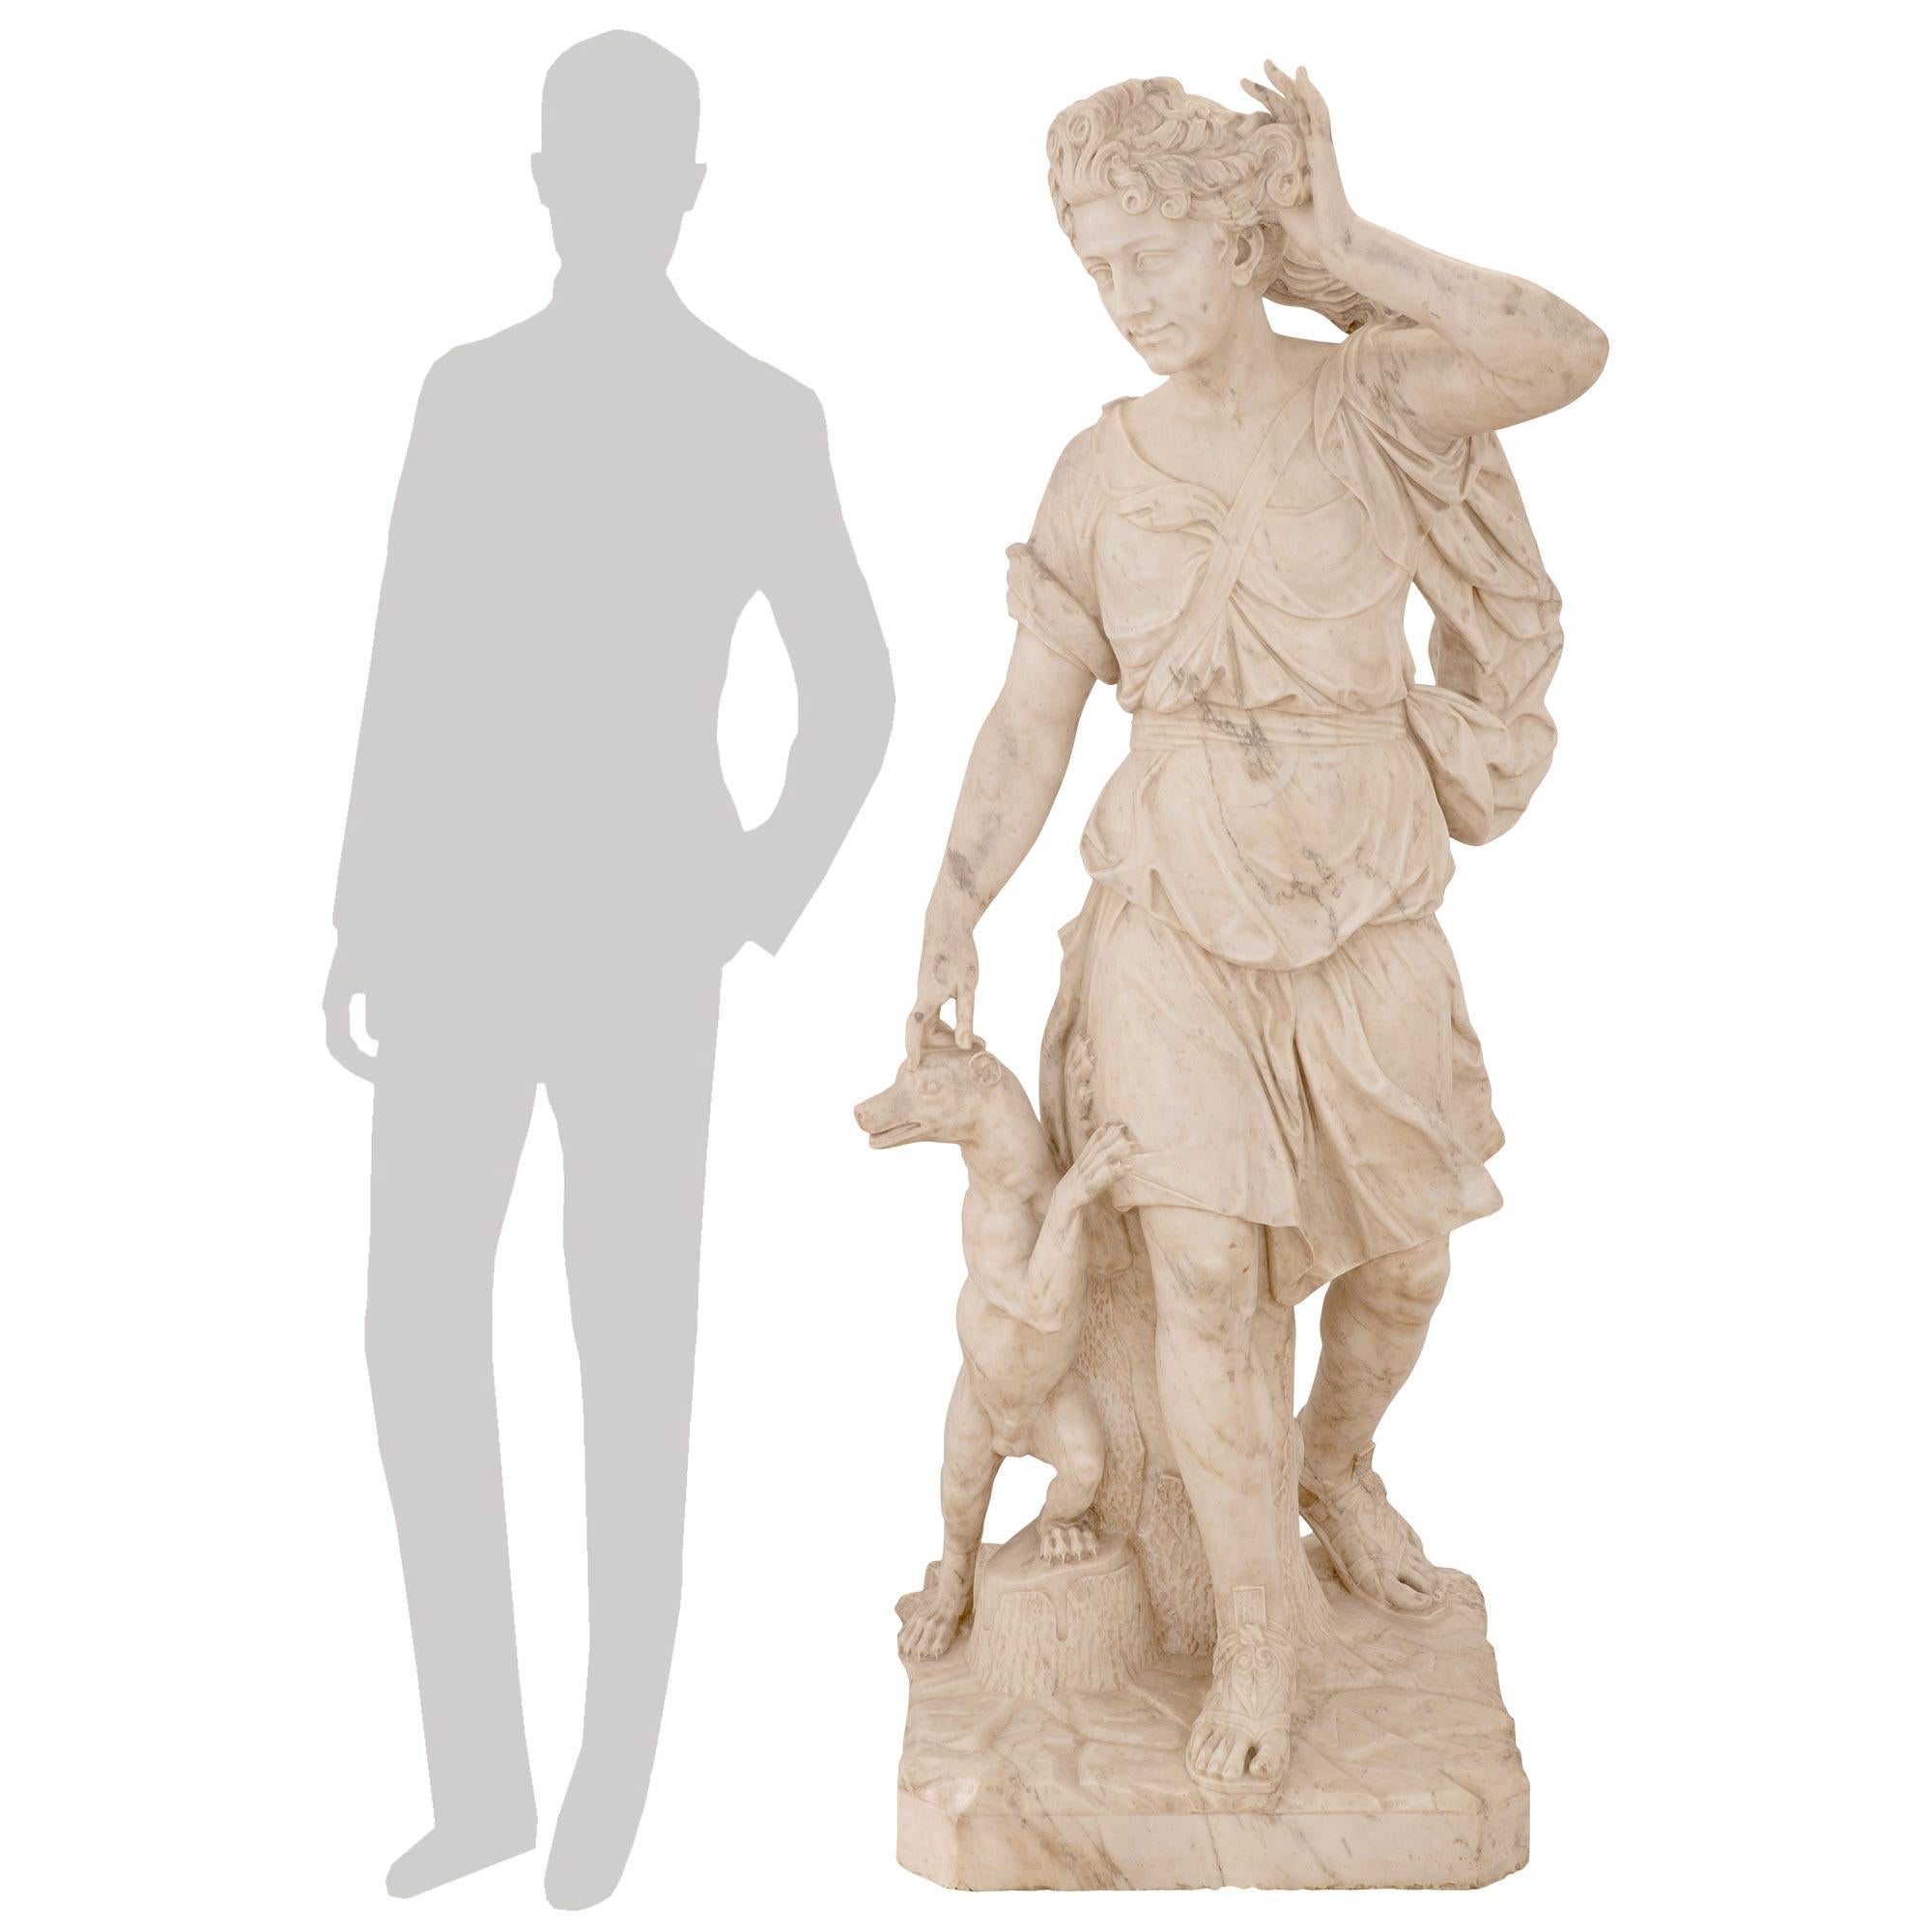 A stunning and extremely high quality Italian 18th century white Carrara marble statue of Diana and her dog. The statue is raised by an impressive thick square base with a wonderfully executed paved design and a finely detailed tree trunk at the